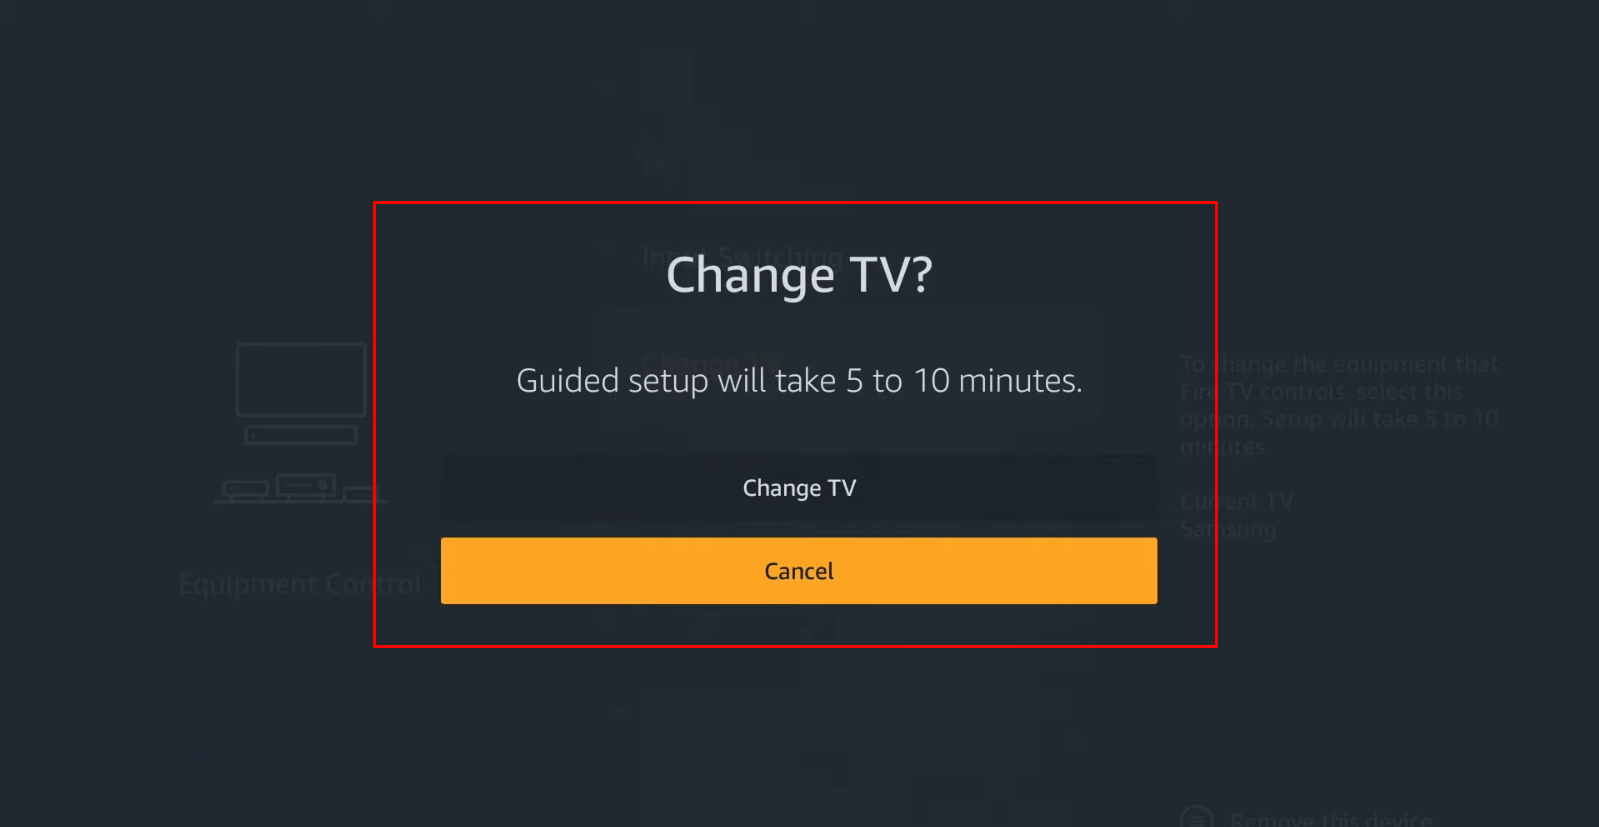  Change TV from the prompt